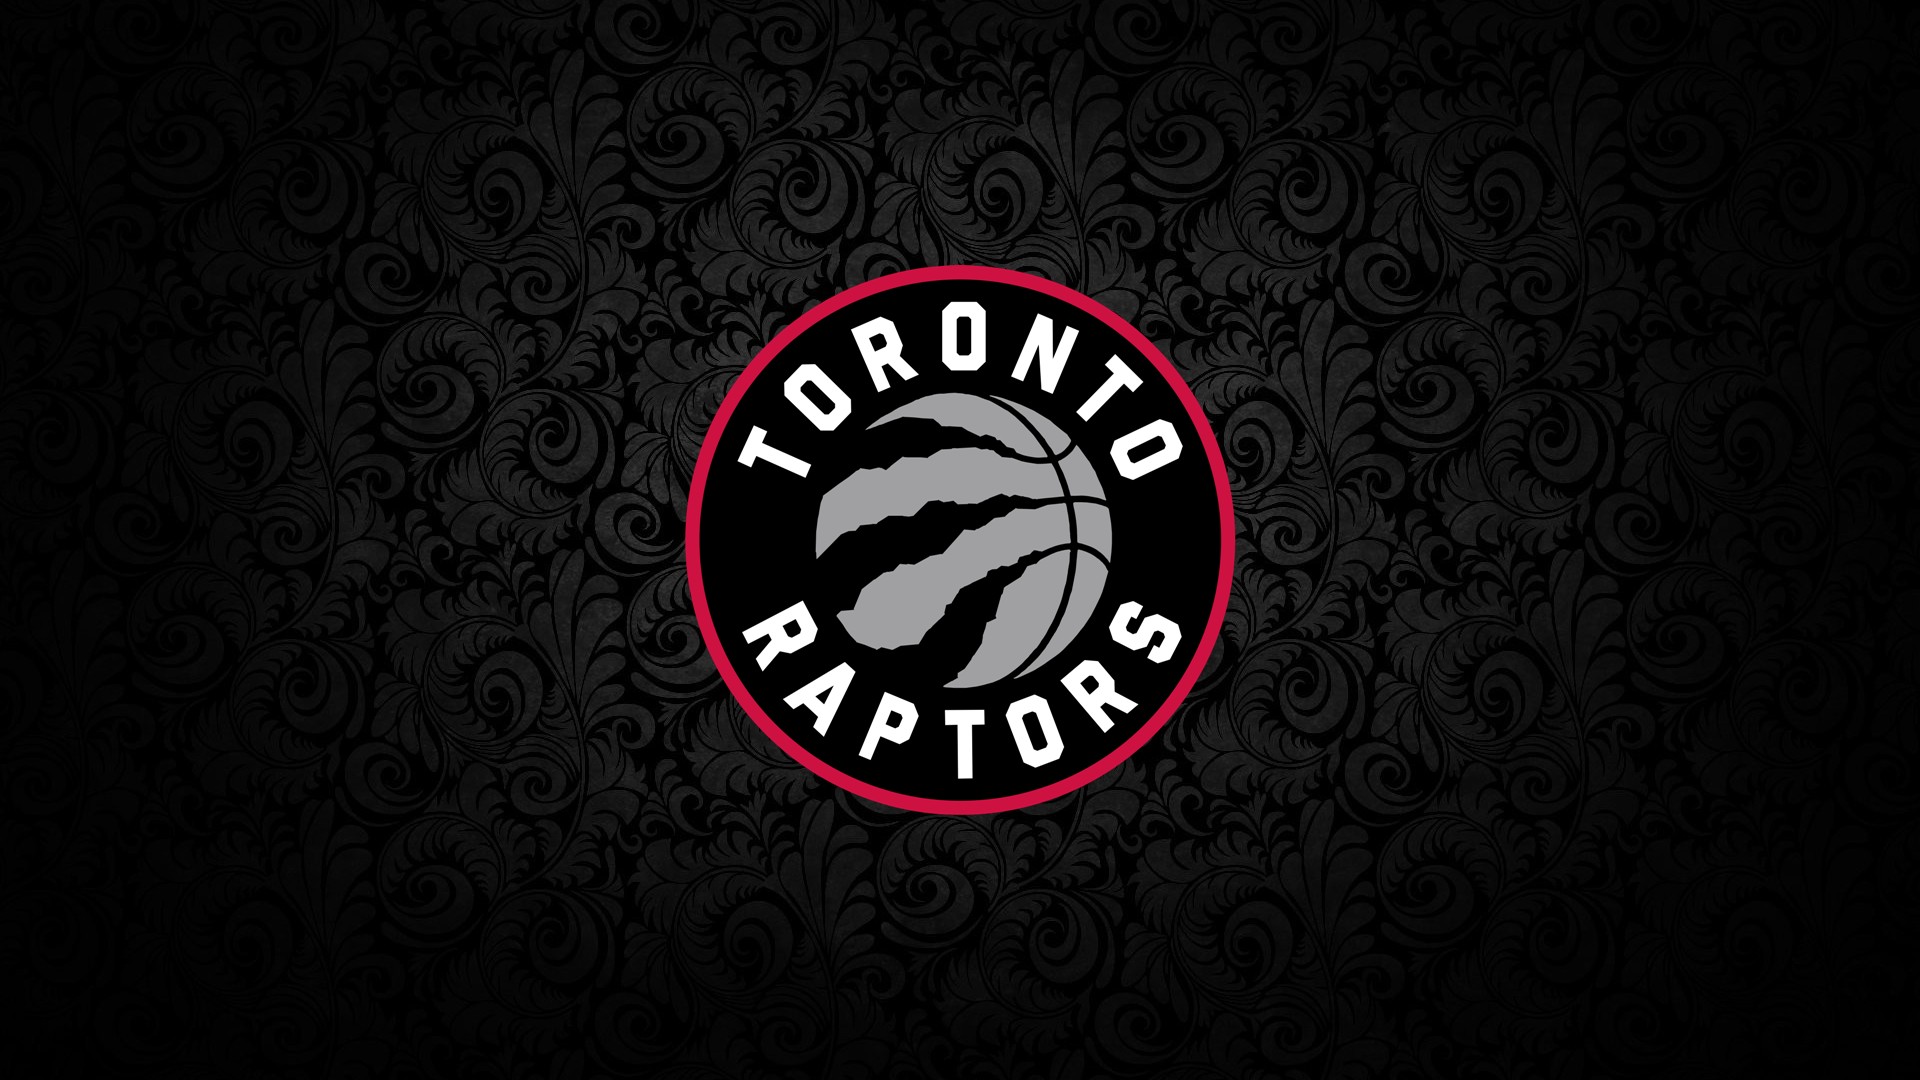 Basketball Toronto Desktop Wallpaper with image dimensions 1920x1080 pixel. You can make this wallpaper for your Desktop Computer Backgrounds, Windows or Mac Screensavers, iPhone Lock screen, Tablet or Android and another Mobile Phone device